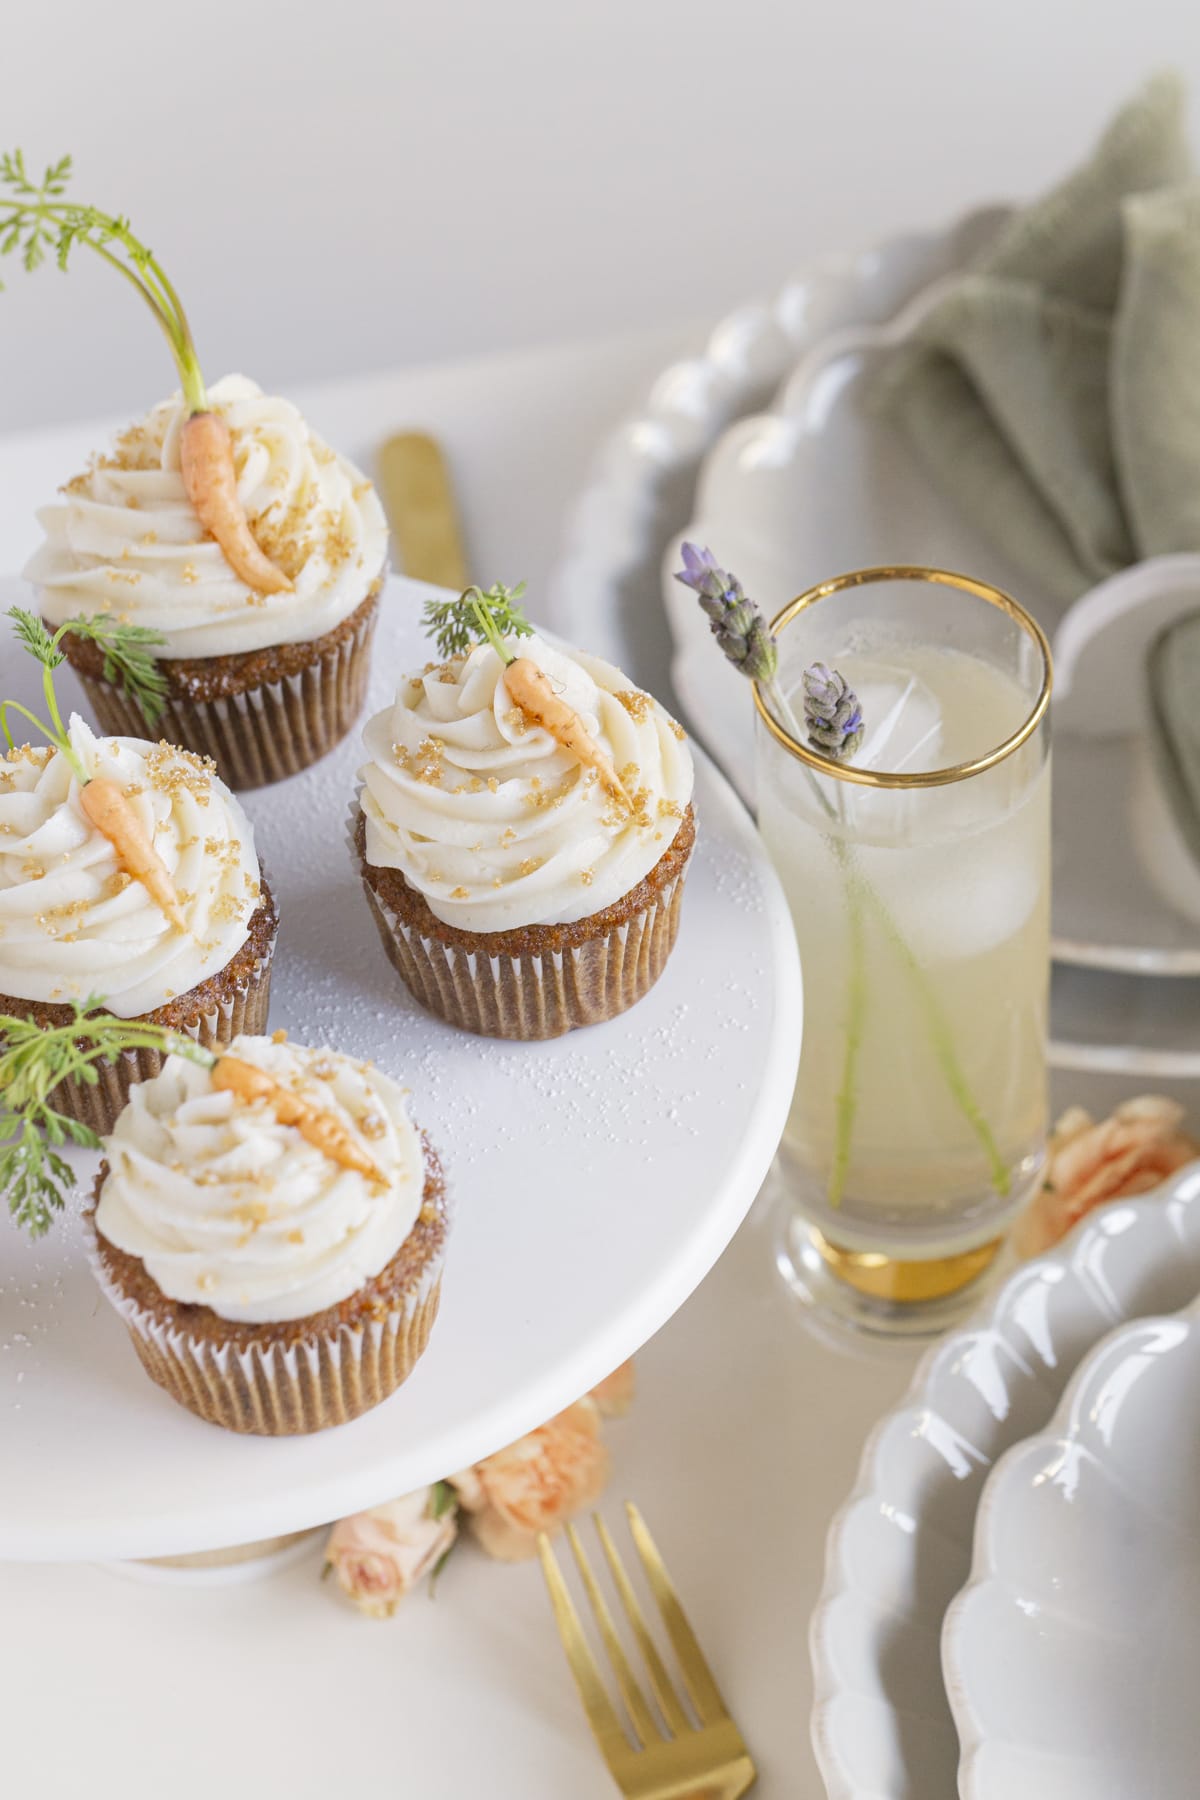 carrot cakes on a cake stand, lemonade with flowers